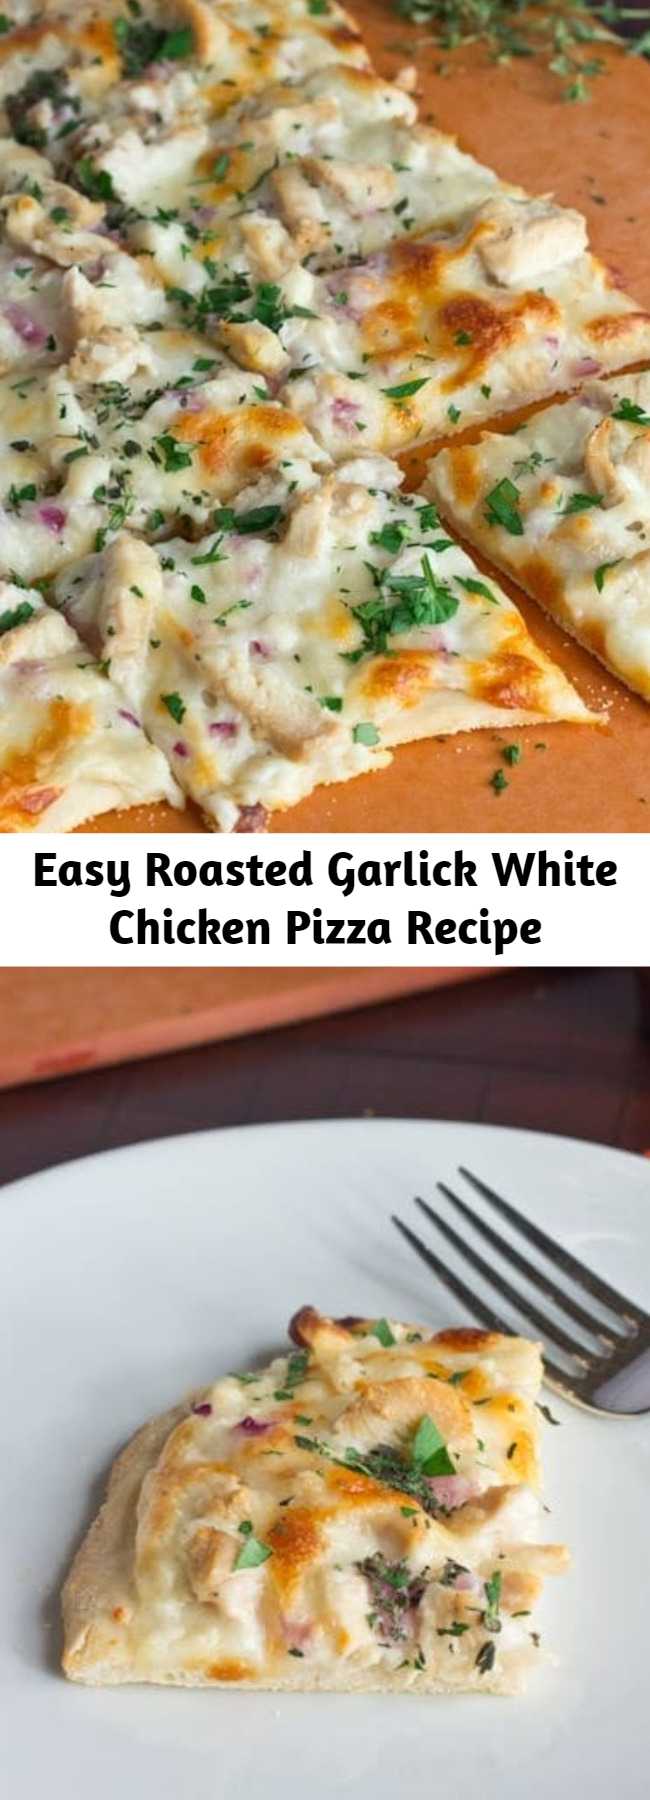 Easy Roasted Garlick White Chicken Pizza Recipe - Roasted garlic sauce topped with chicken, red onions, and herbs. A great white chicken pizza that will rival any pizza out there! And a healthier alternative to pizza.